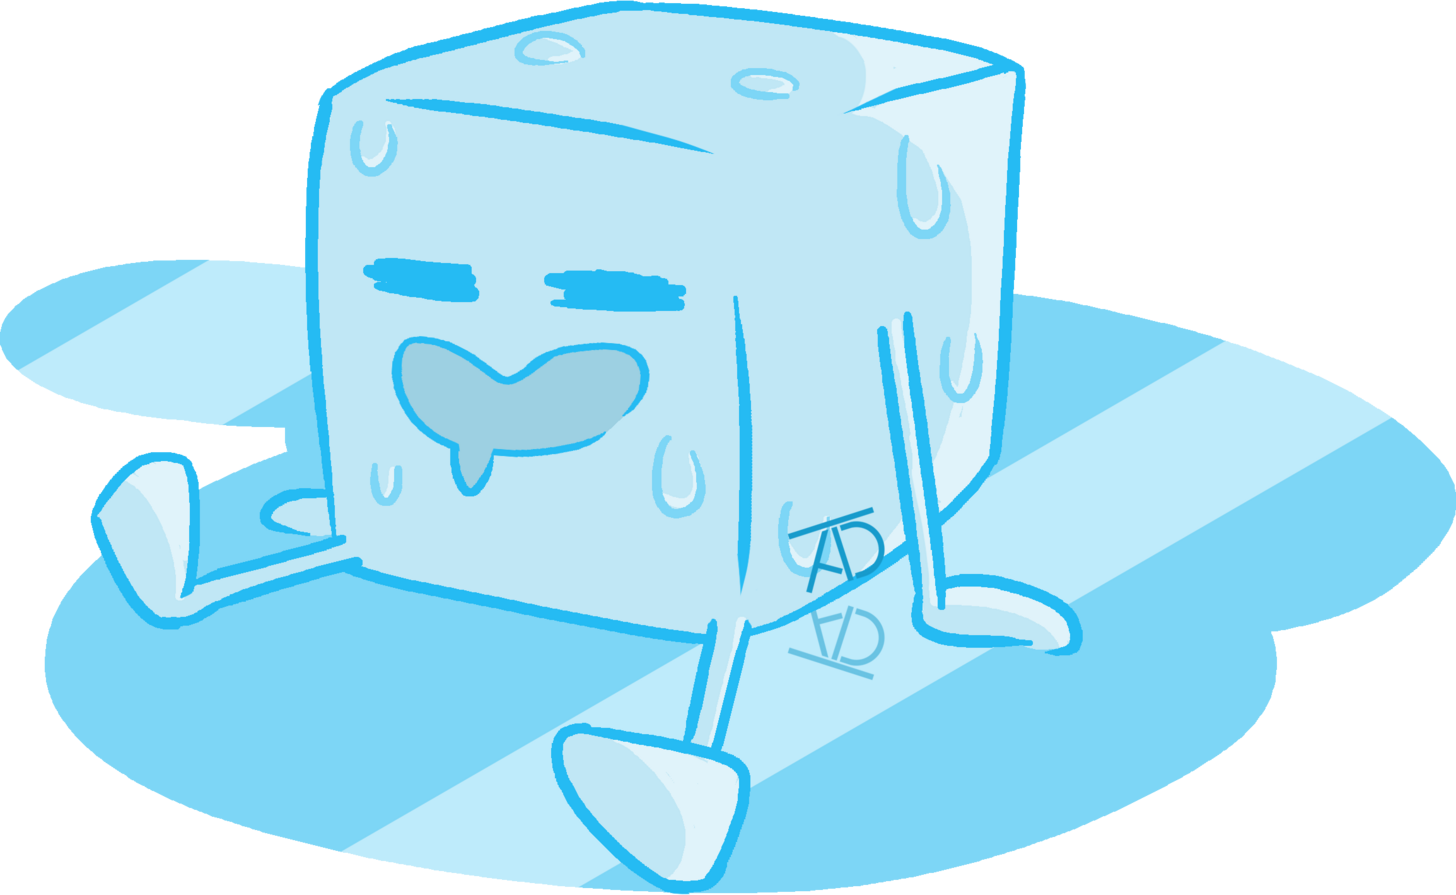 How To Draw An Ice Cube How To Draw Ice Cube How To Draw An Ice Images